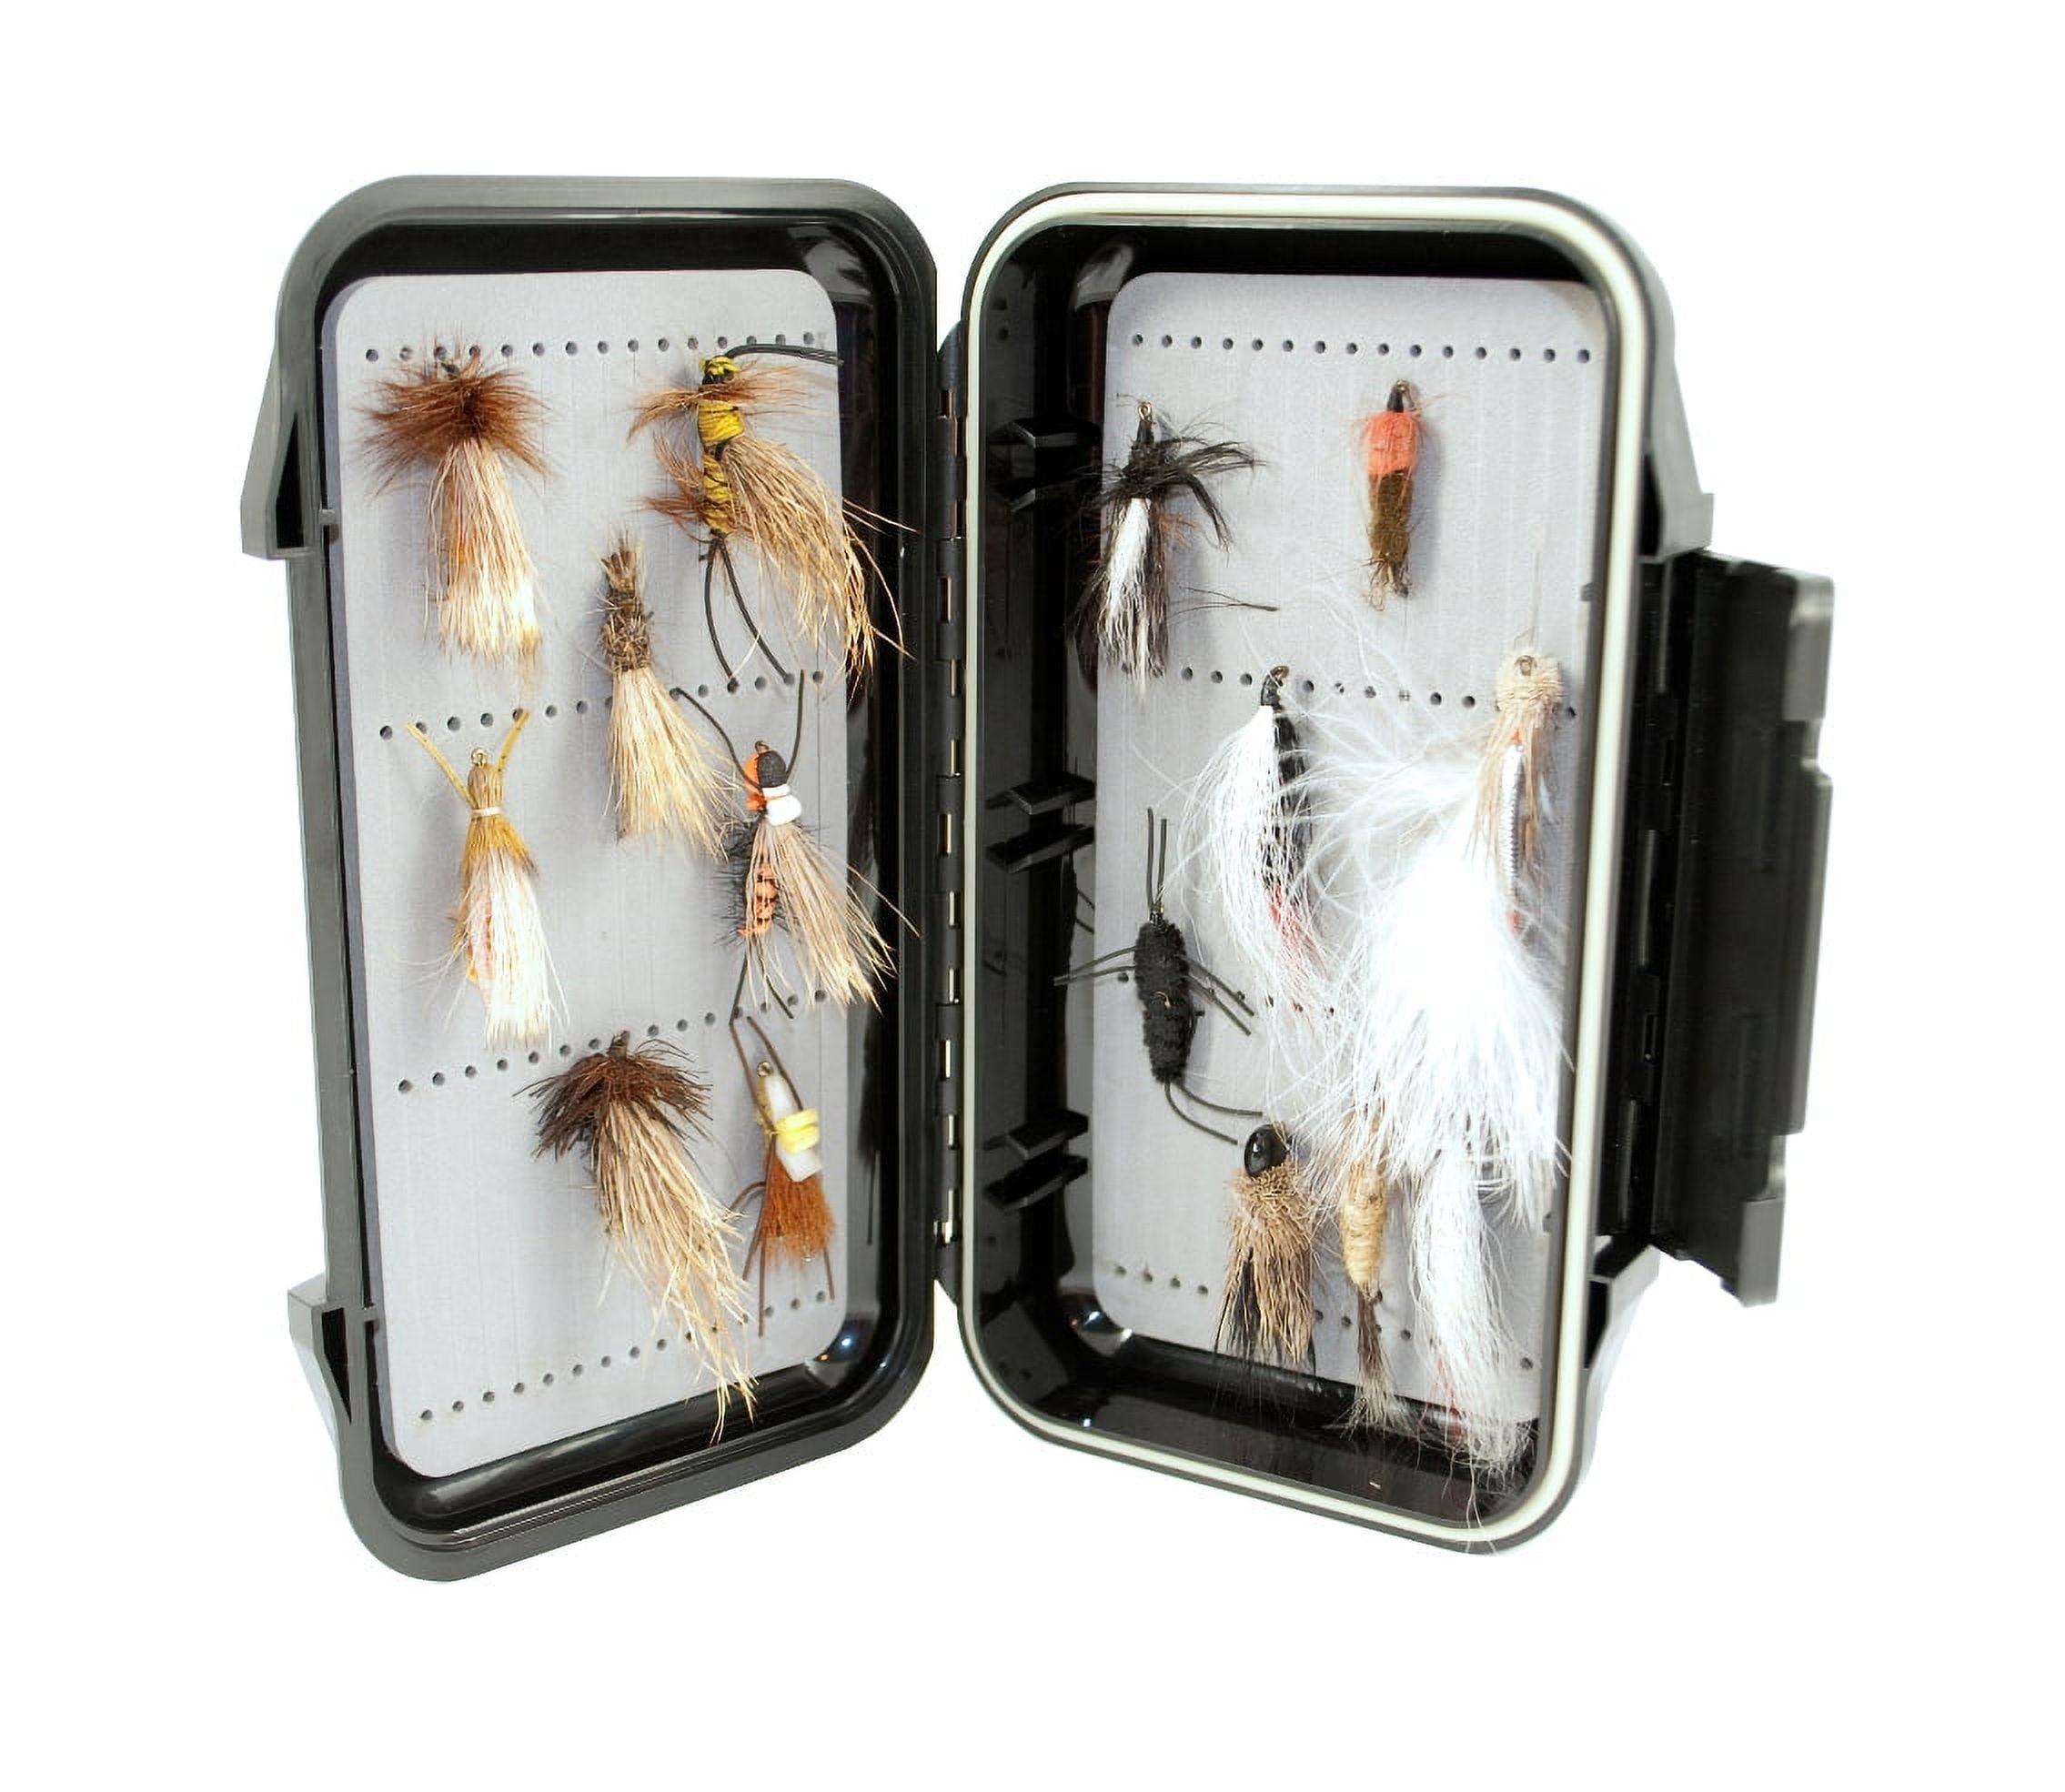 Salmon Fly Box- Holds Large Streamers and Flies